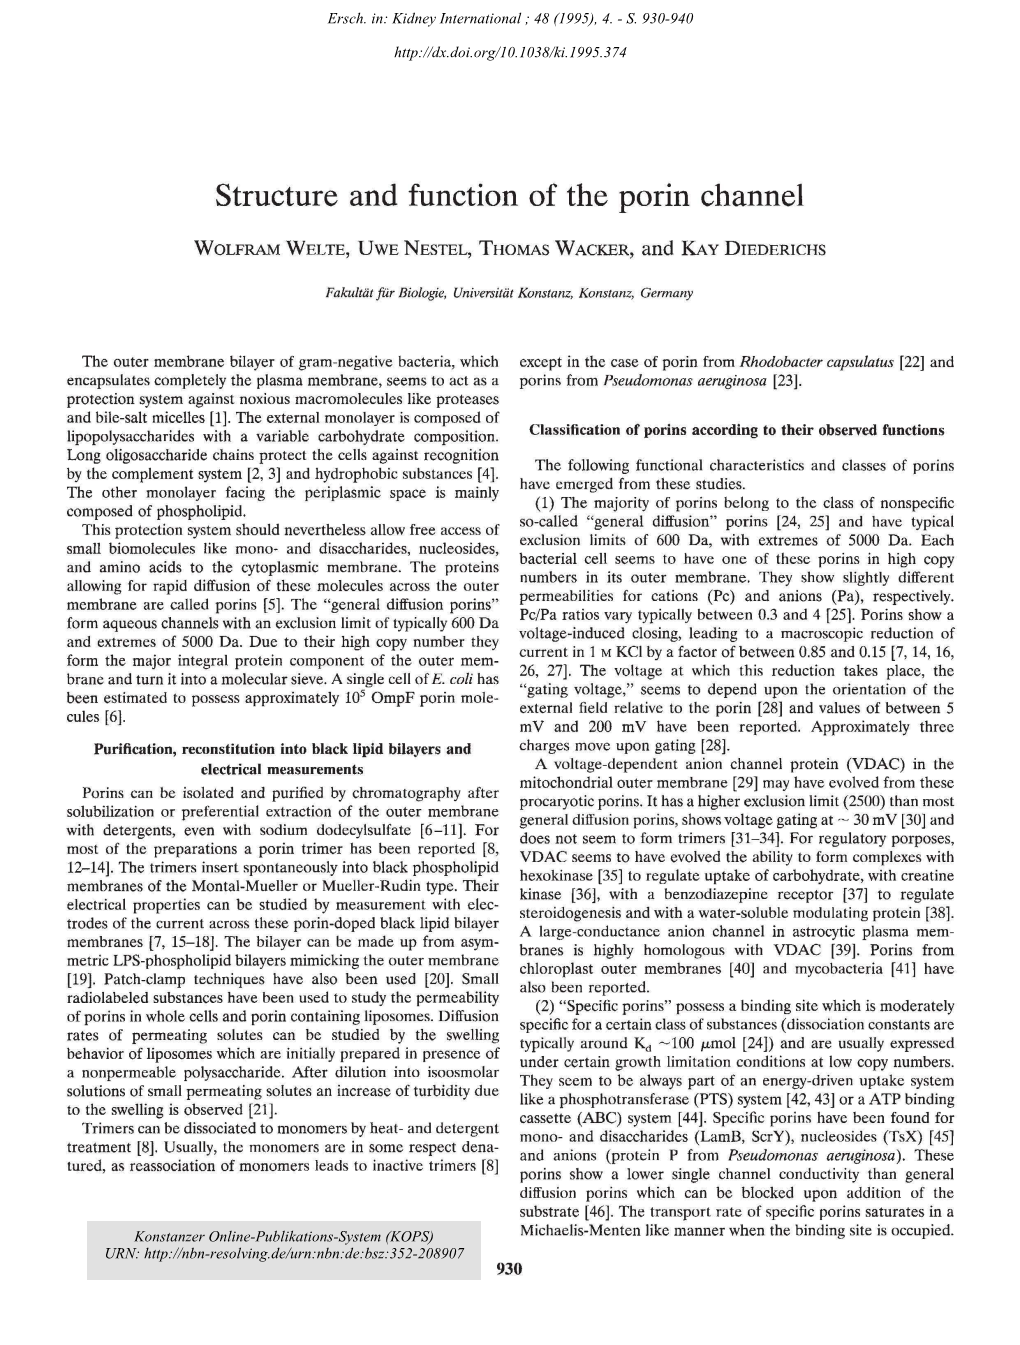 Structure and Function of the Porin Channel